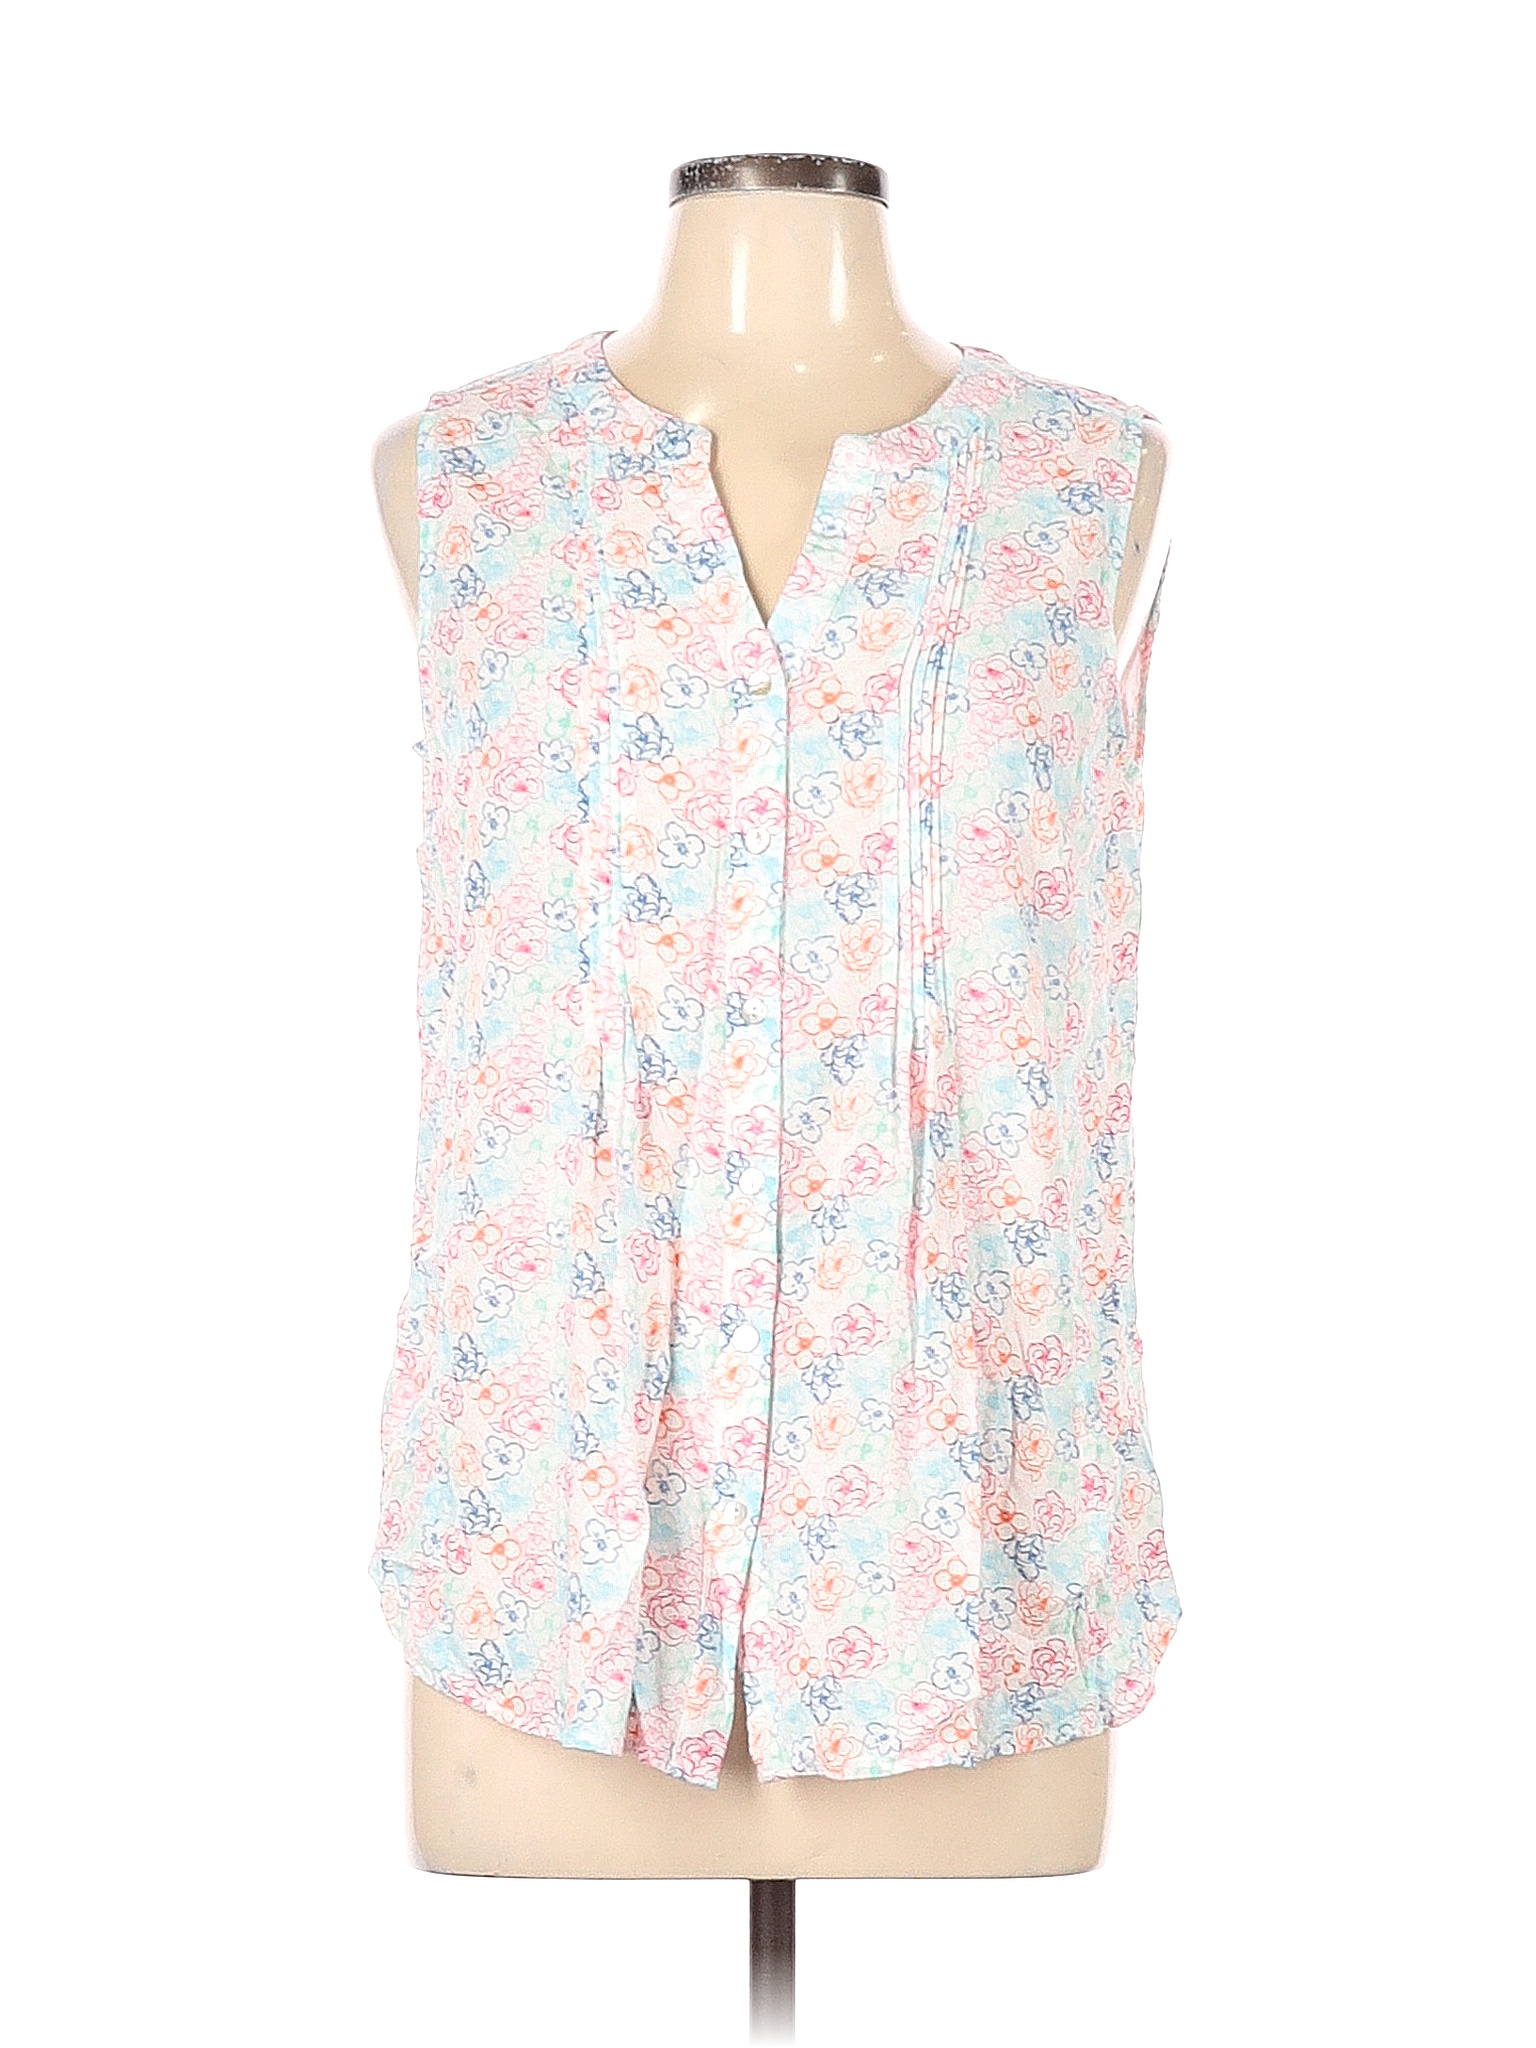 Jane and Delancey 100% Rayon Floral White Sleeveless Button-Down Shirt ...